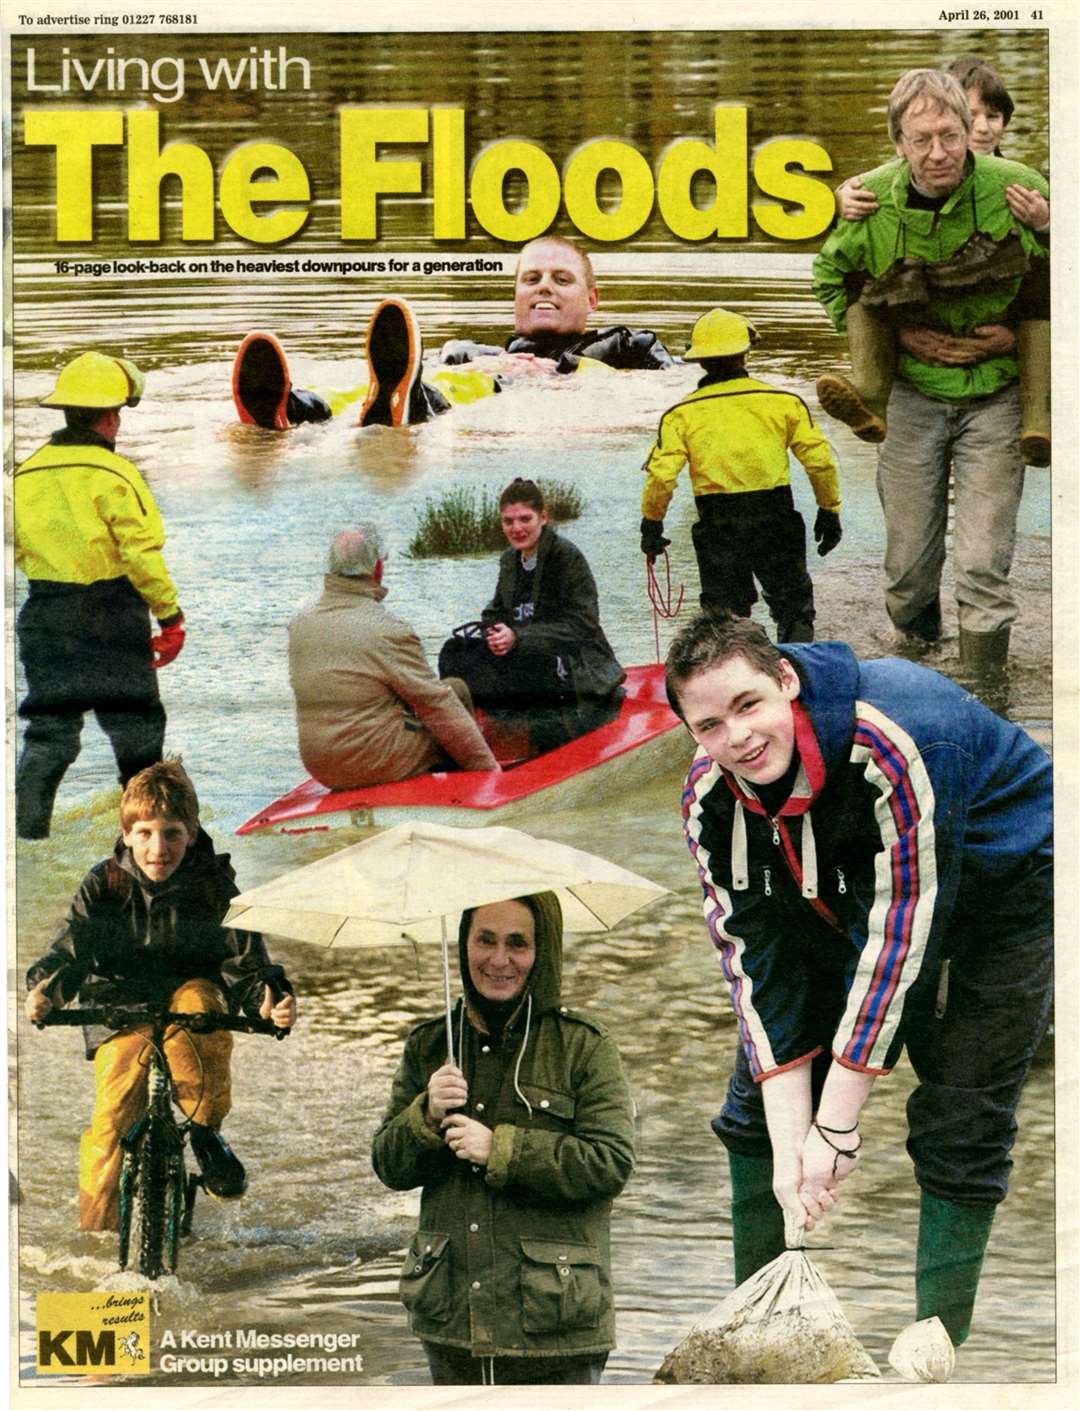 The front cover of the Kent Messenger's special supplement, Living with The Floods, published in April 2001